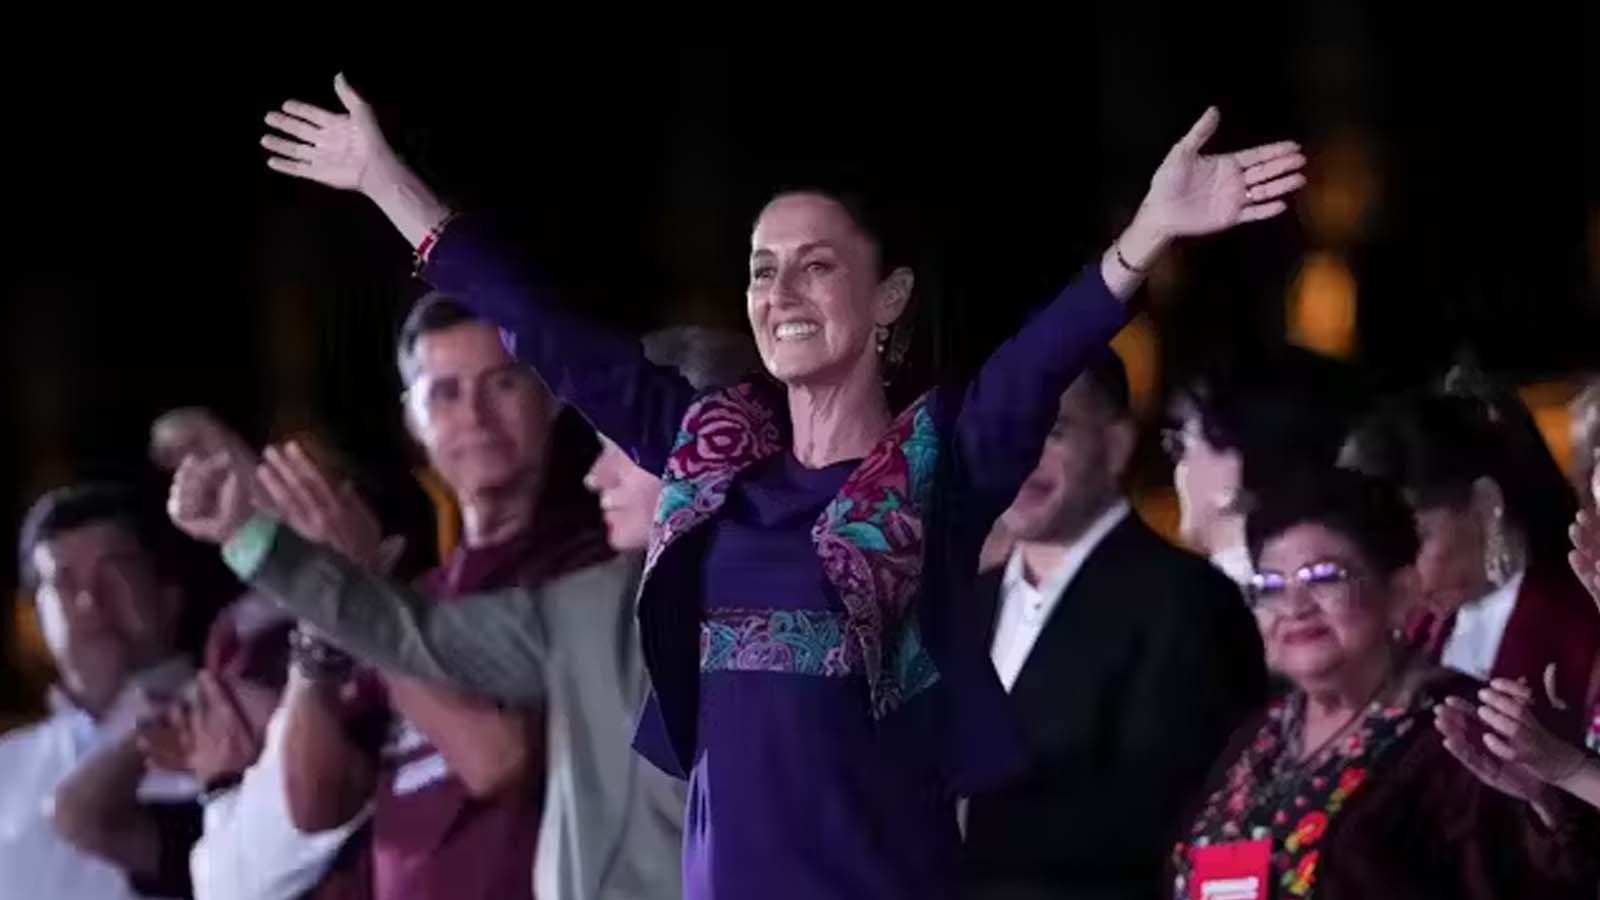 Mexico Elects First Female President: Sociological Implications and Future Directions